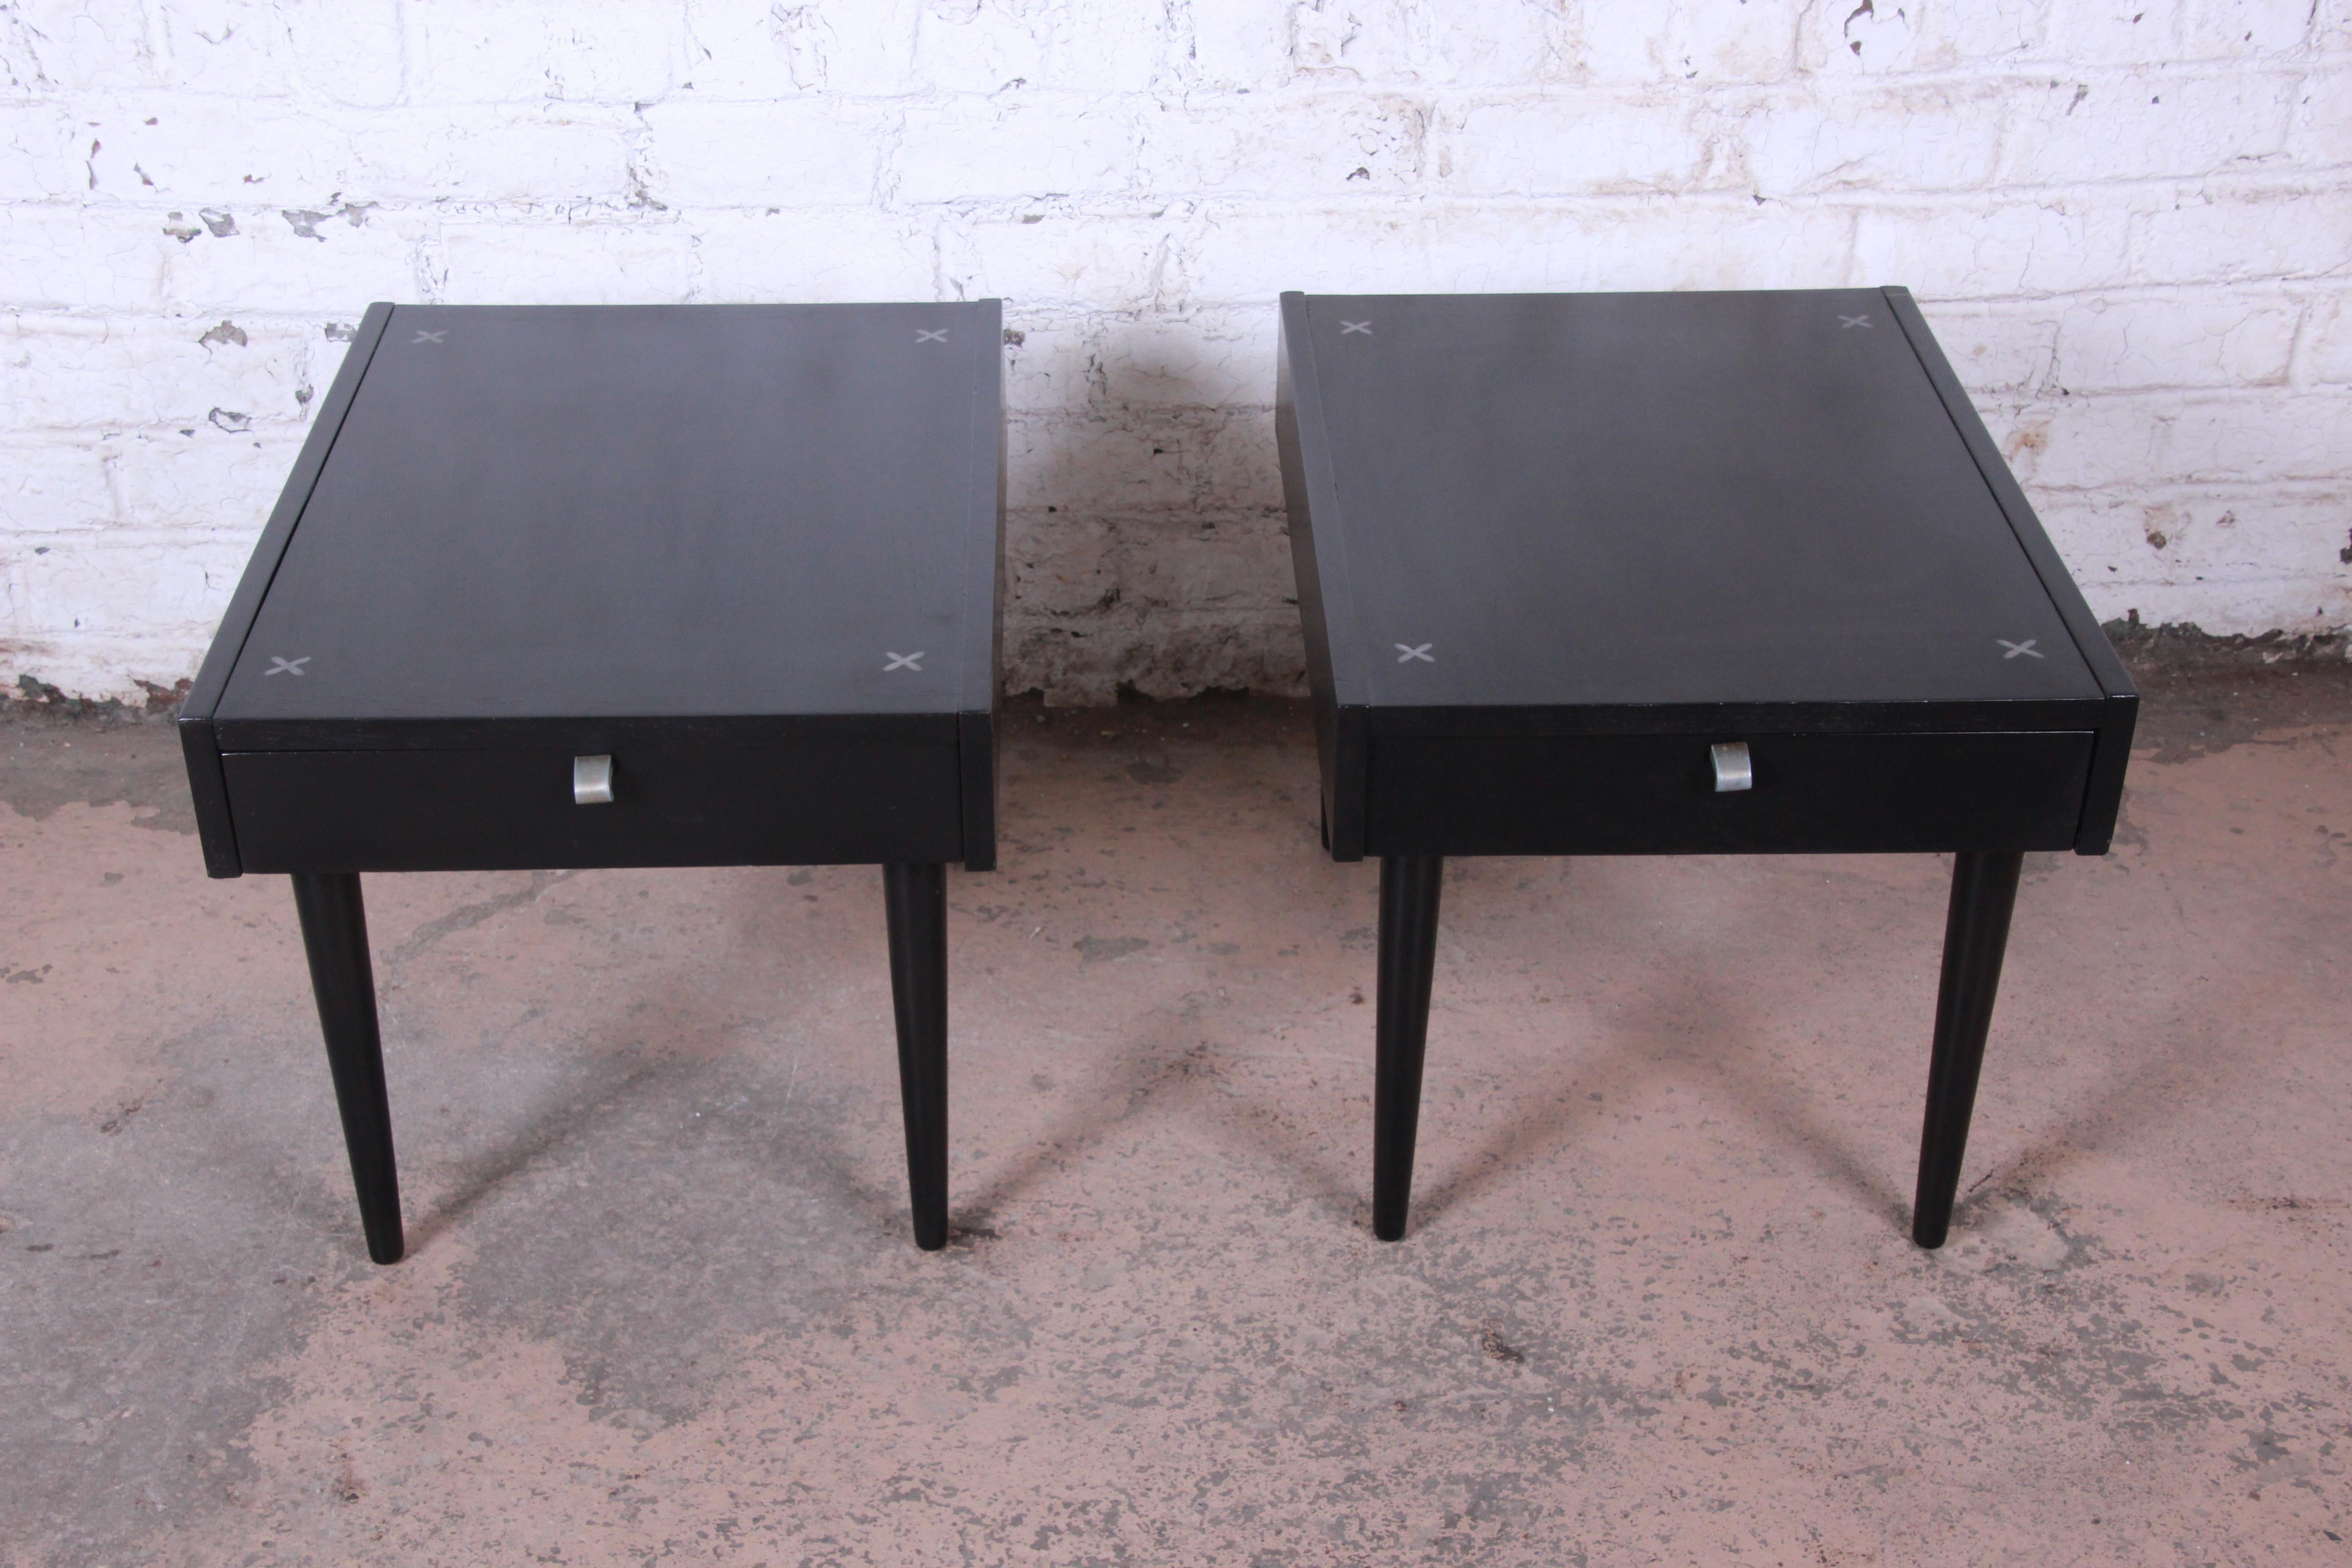 Offering an exceptional pair of mid-century modern nightstands or end tables designed by Merton Gershun for American of Martinsville. The tables feature a stunning newly ebonized finish and the iconic aluminium X-shaped inlays on top. The tables